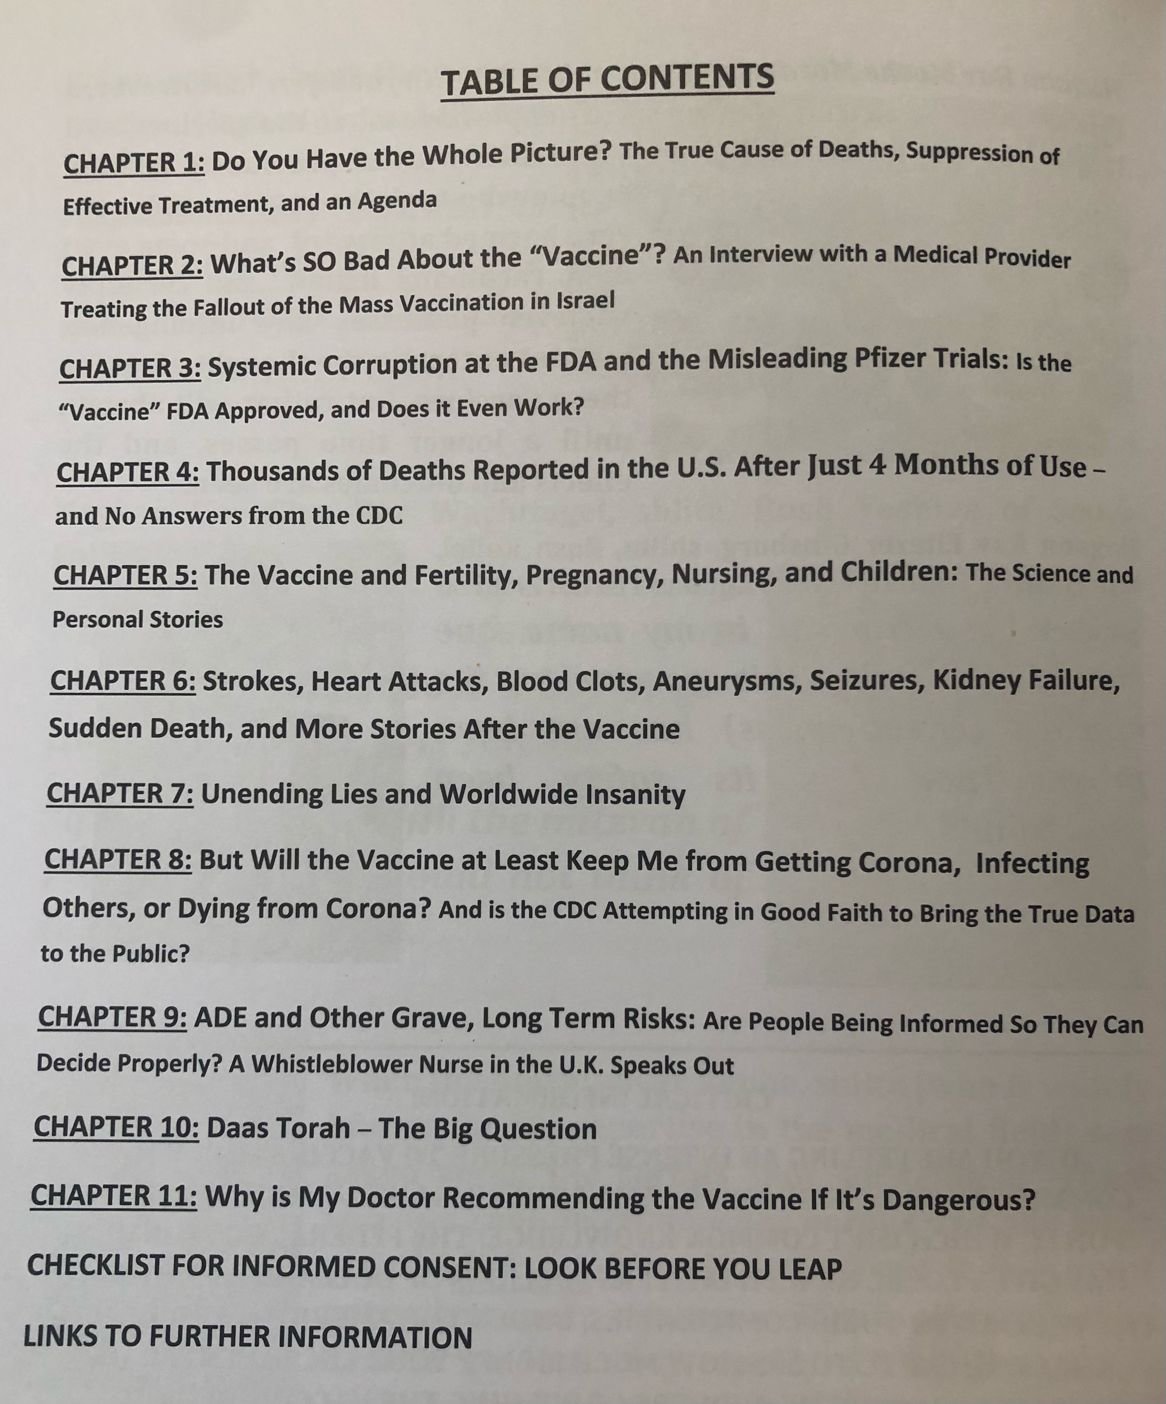 The table of contents from “Look Before You Leap,” an anti-vaccine booklet sent to Orthodox Jewish residents of the Five Towns, Brooklyn and New Jersey.